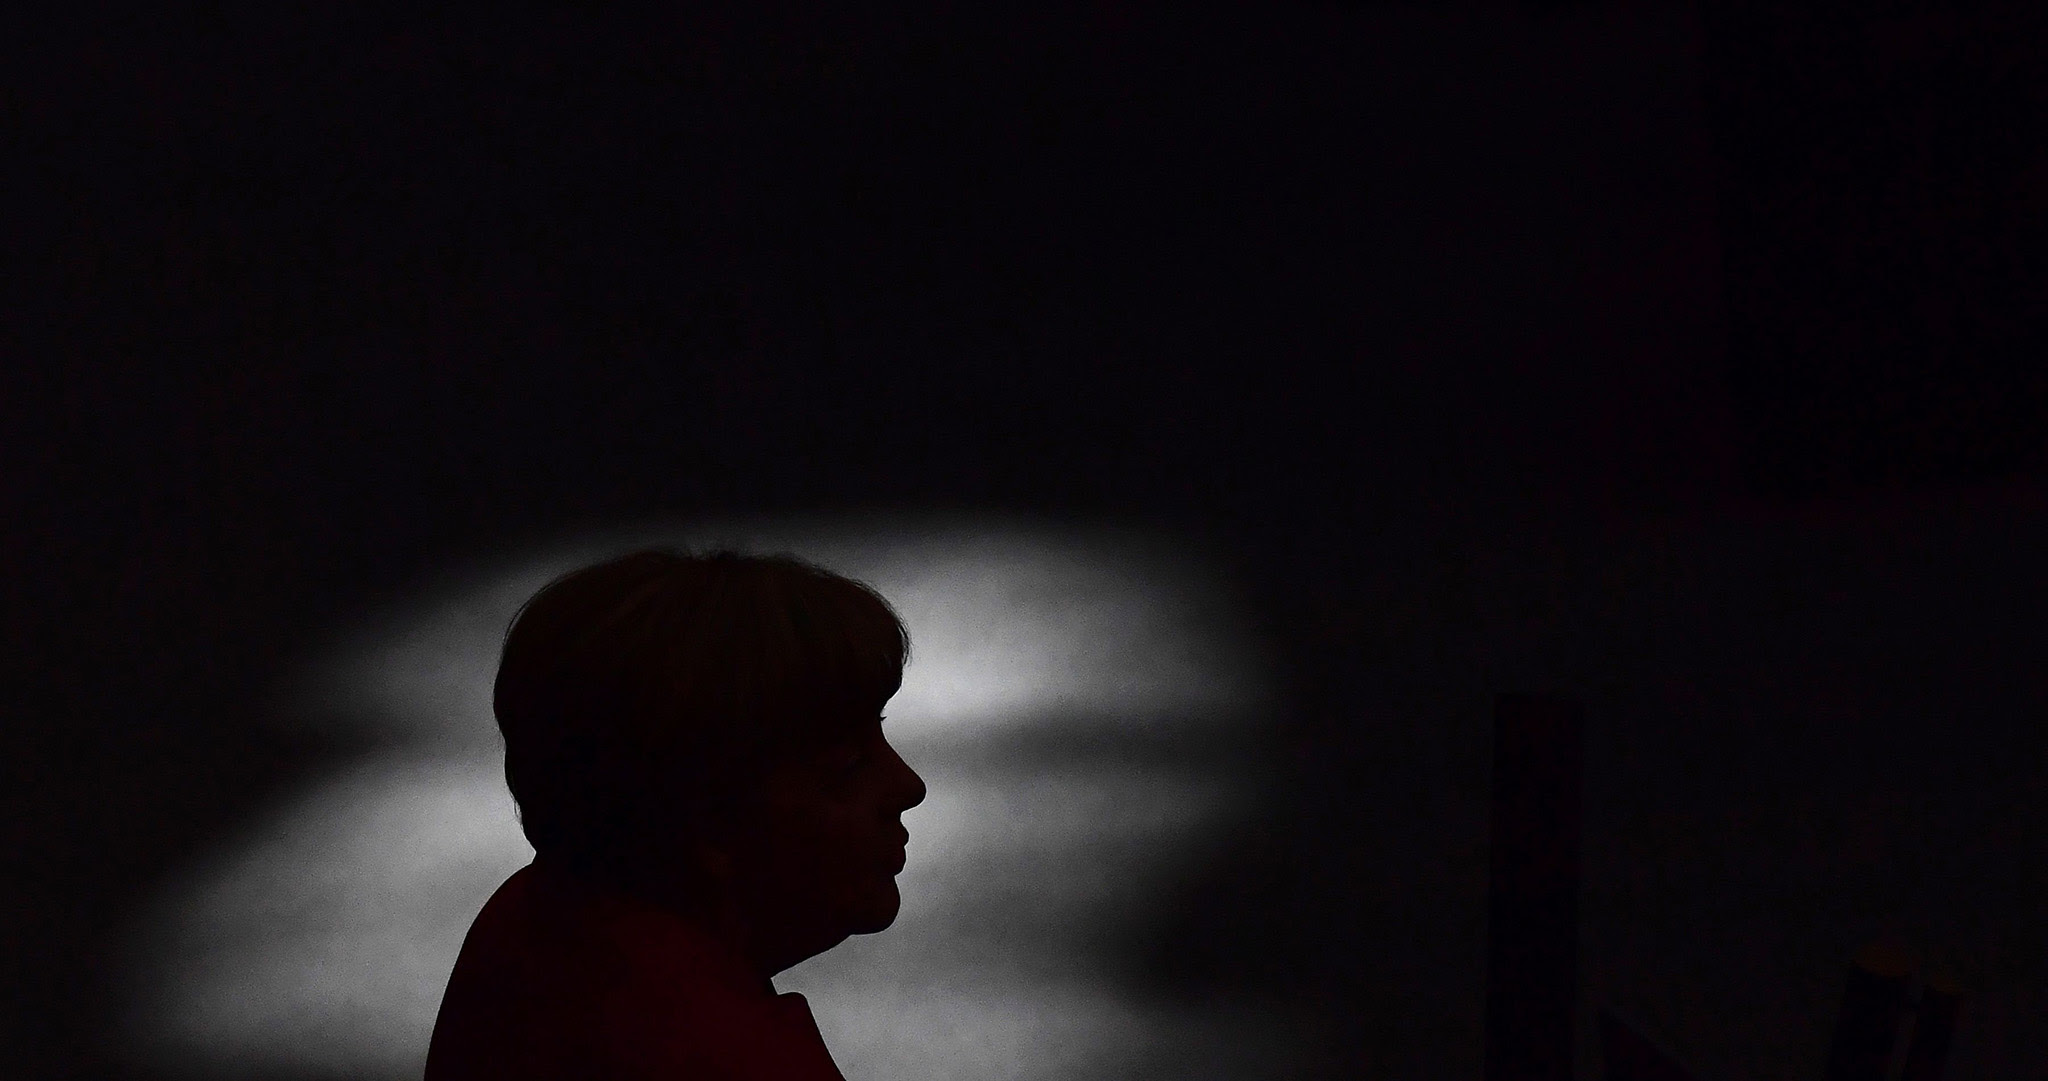 German Chancellor Angela Merkel is silhouetted as she gives a speech during a session of the German Bundestag (lower house of parliament) in Berlin on September 7, 2016. / AFP PHOTO / TOBIAS SCHWARZTOBIAS SCHWARZ/AFP/Getty Images